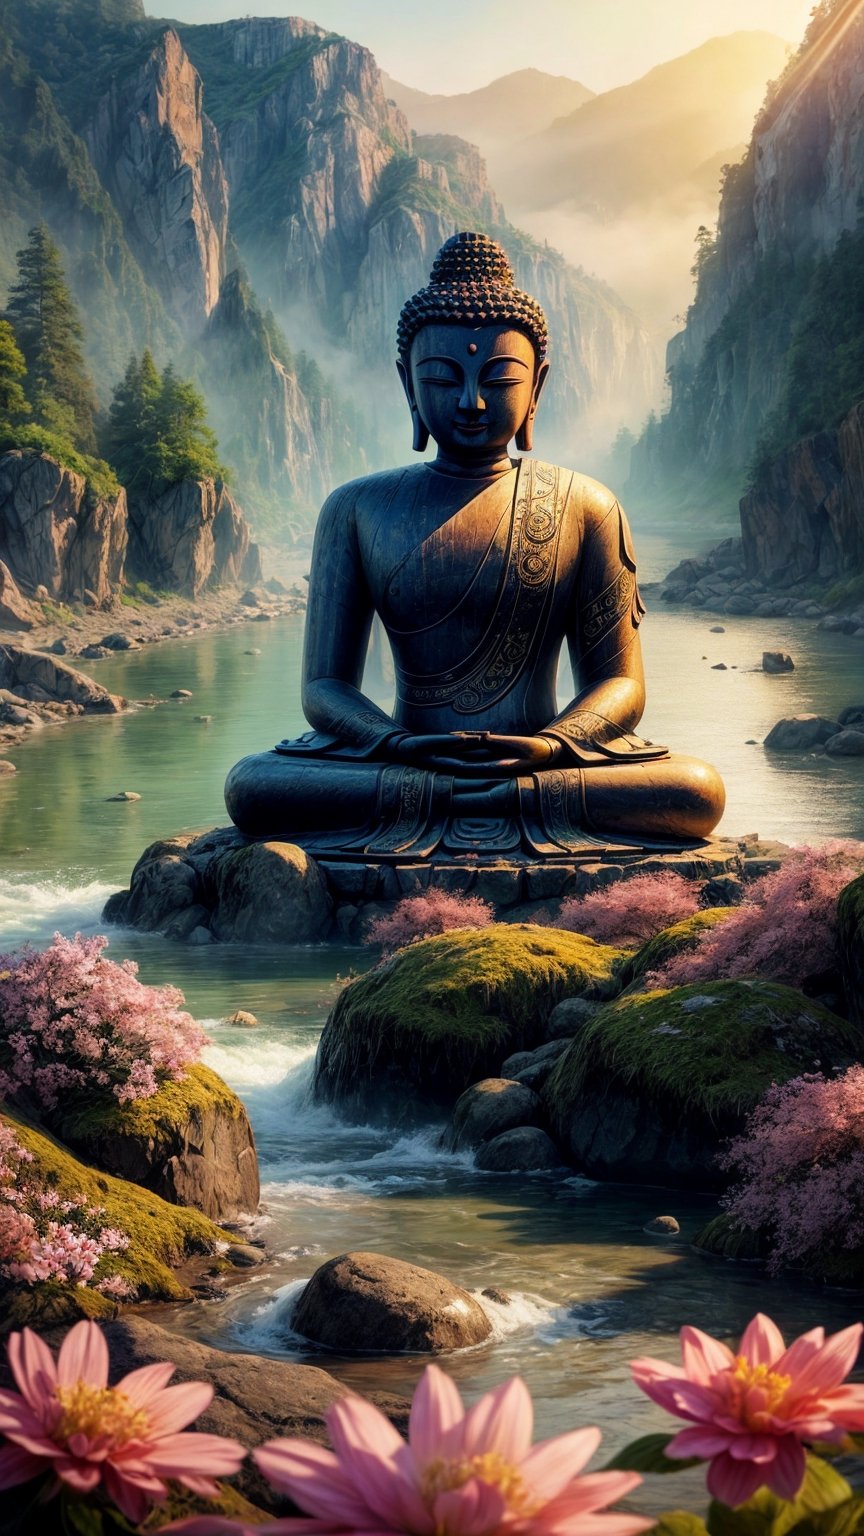 masterpiece, best quality, official_art, aesthetic and beautiful, potrait of Buddha statue engraved in cliff rocks, foggy river, flowers along riverside, spring_season, no_humans, sunrise